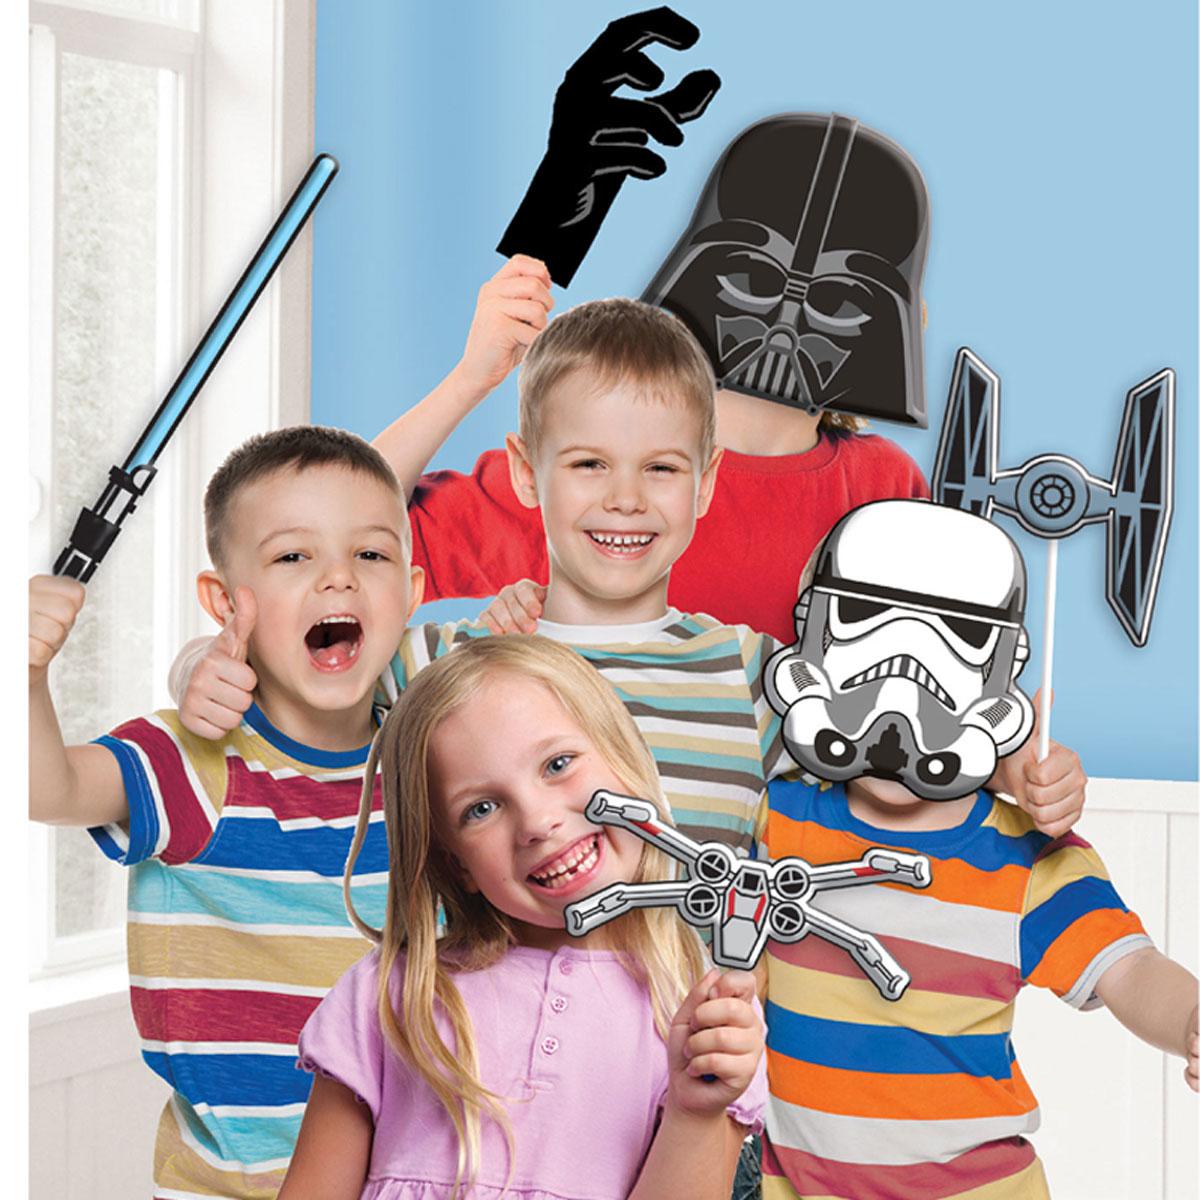 10pc Star Wars Photo Props Kit for children and adults by Amscan 9903094 available here at Karnival Costumes online party shop